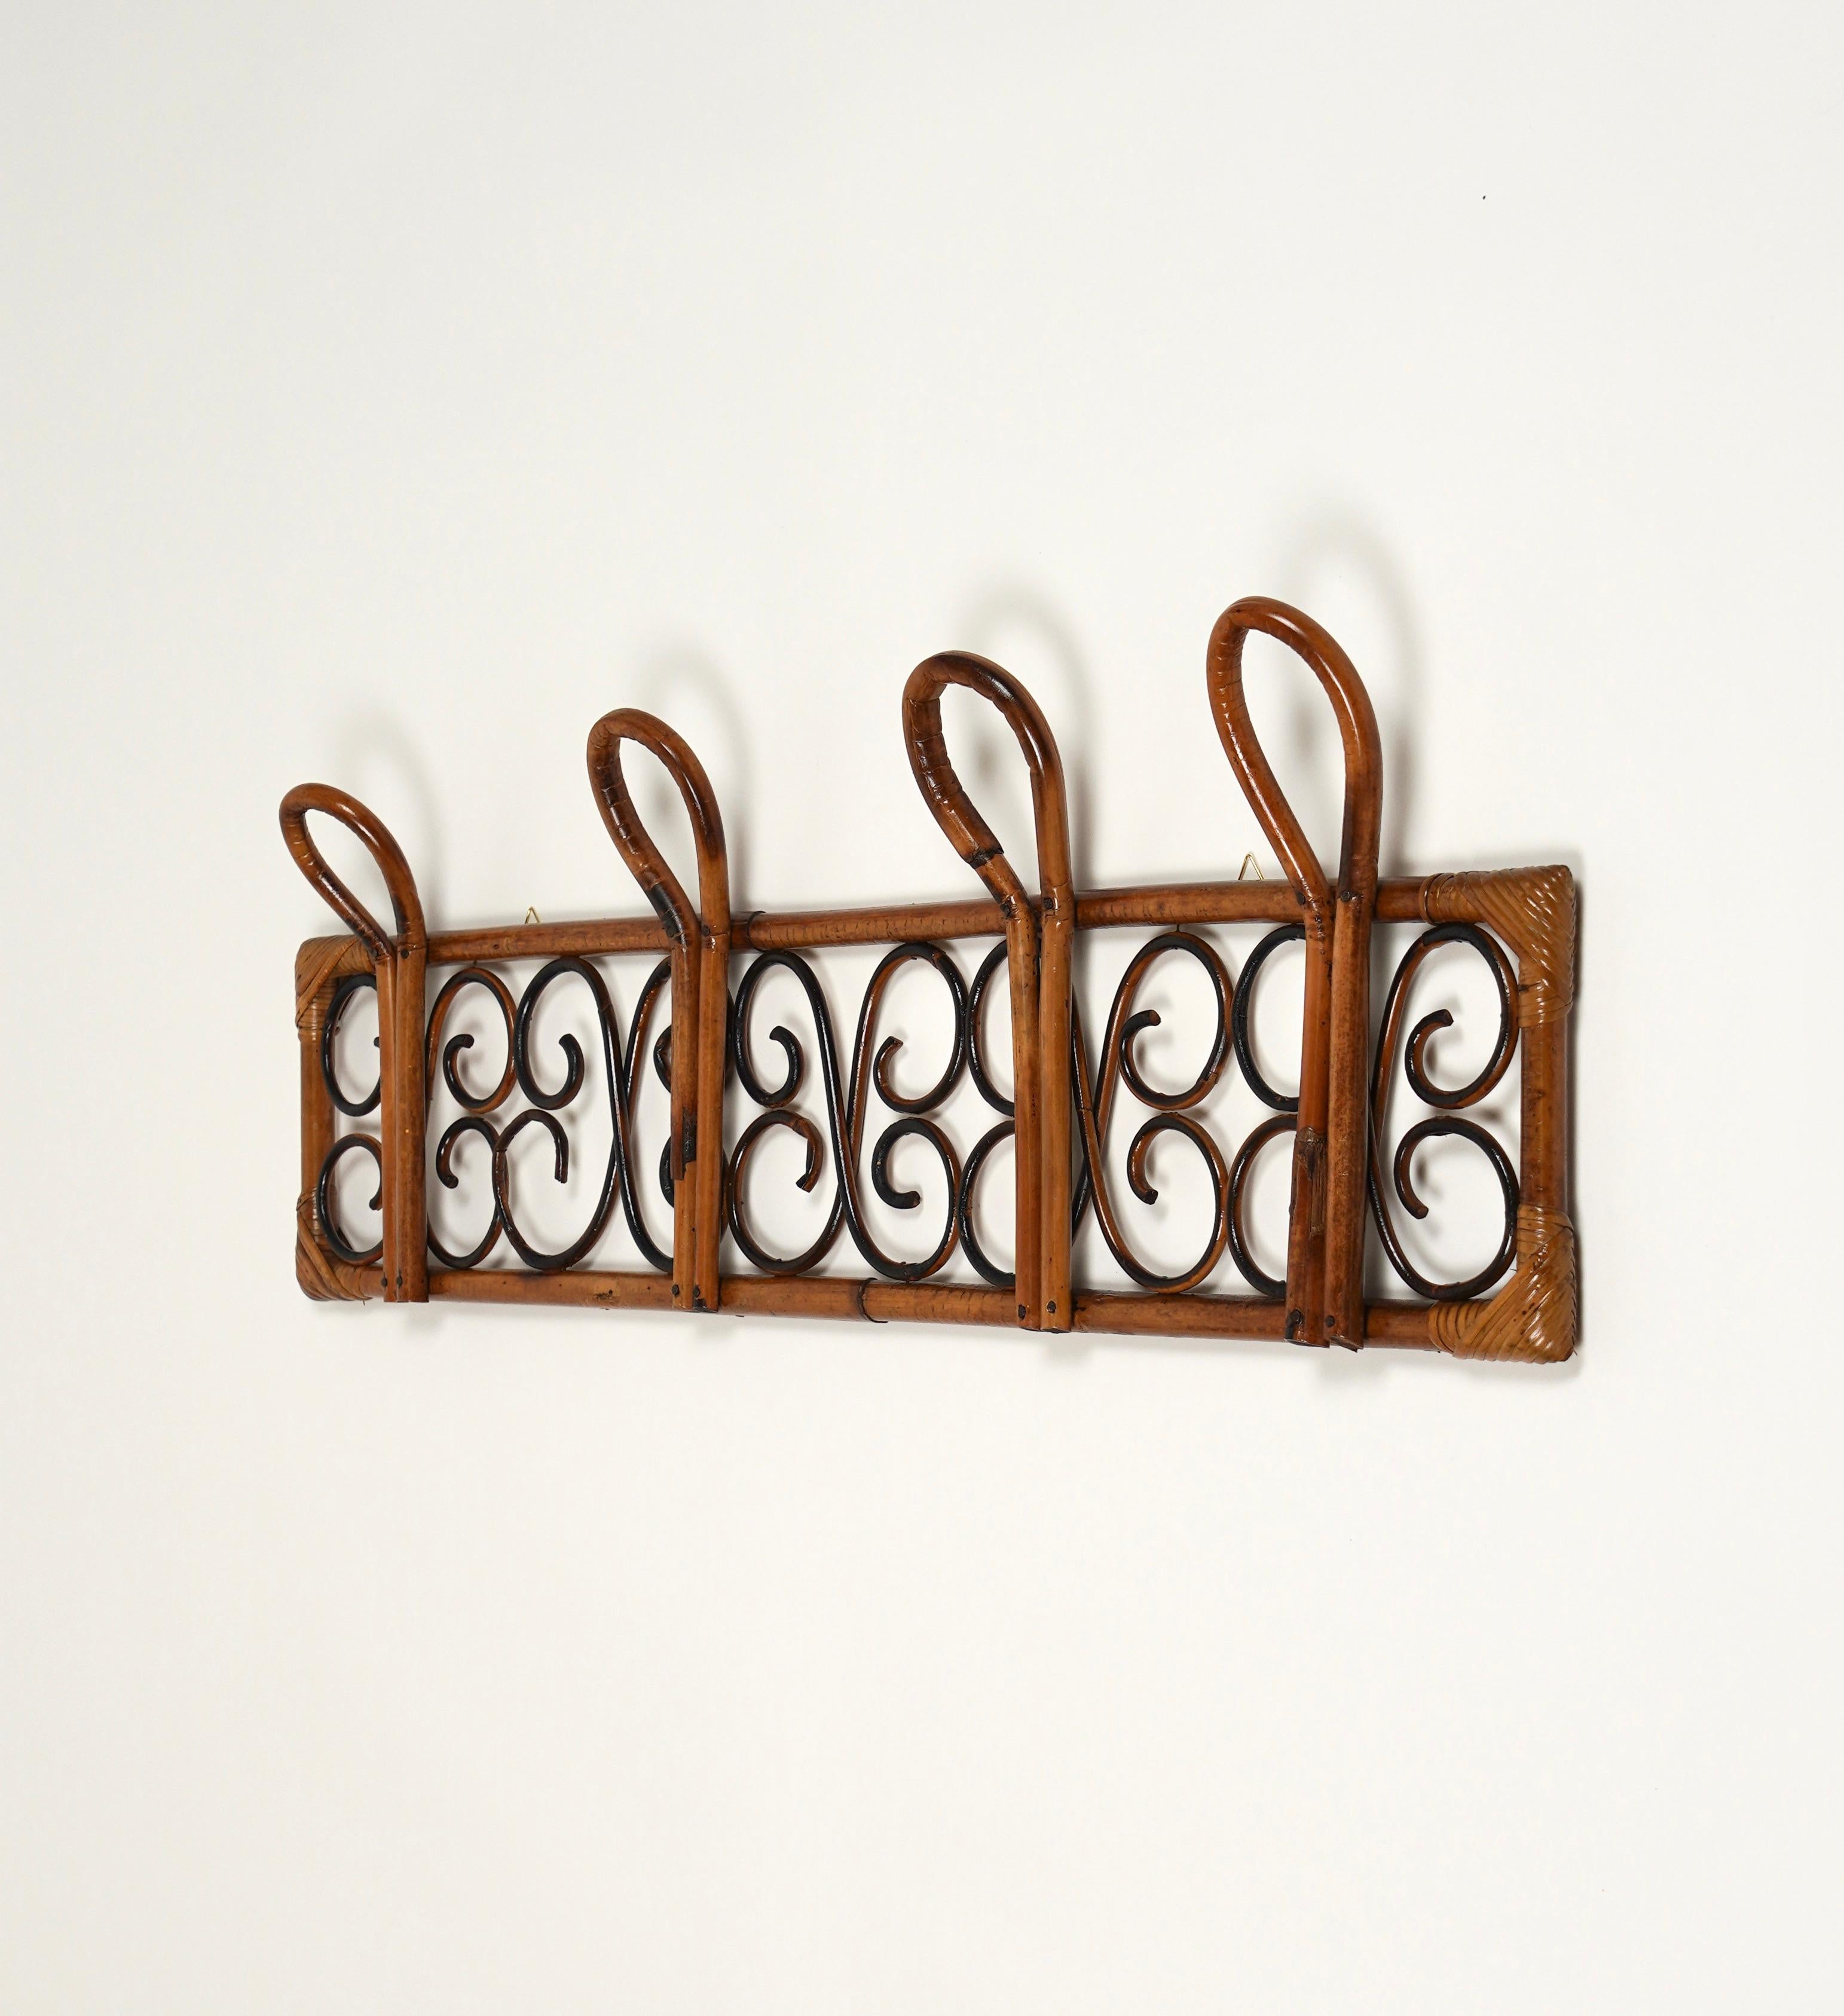 Midcentury Rattan and Bamboo Wall Coat Rack Stand, Italy, 1960s For Sale 1